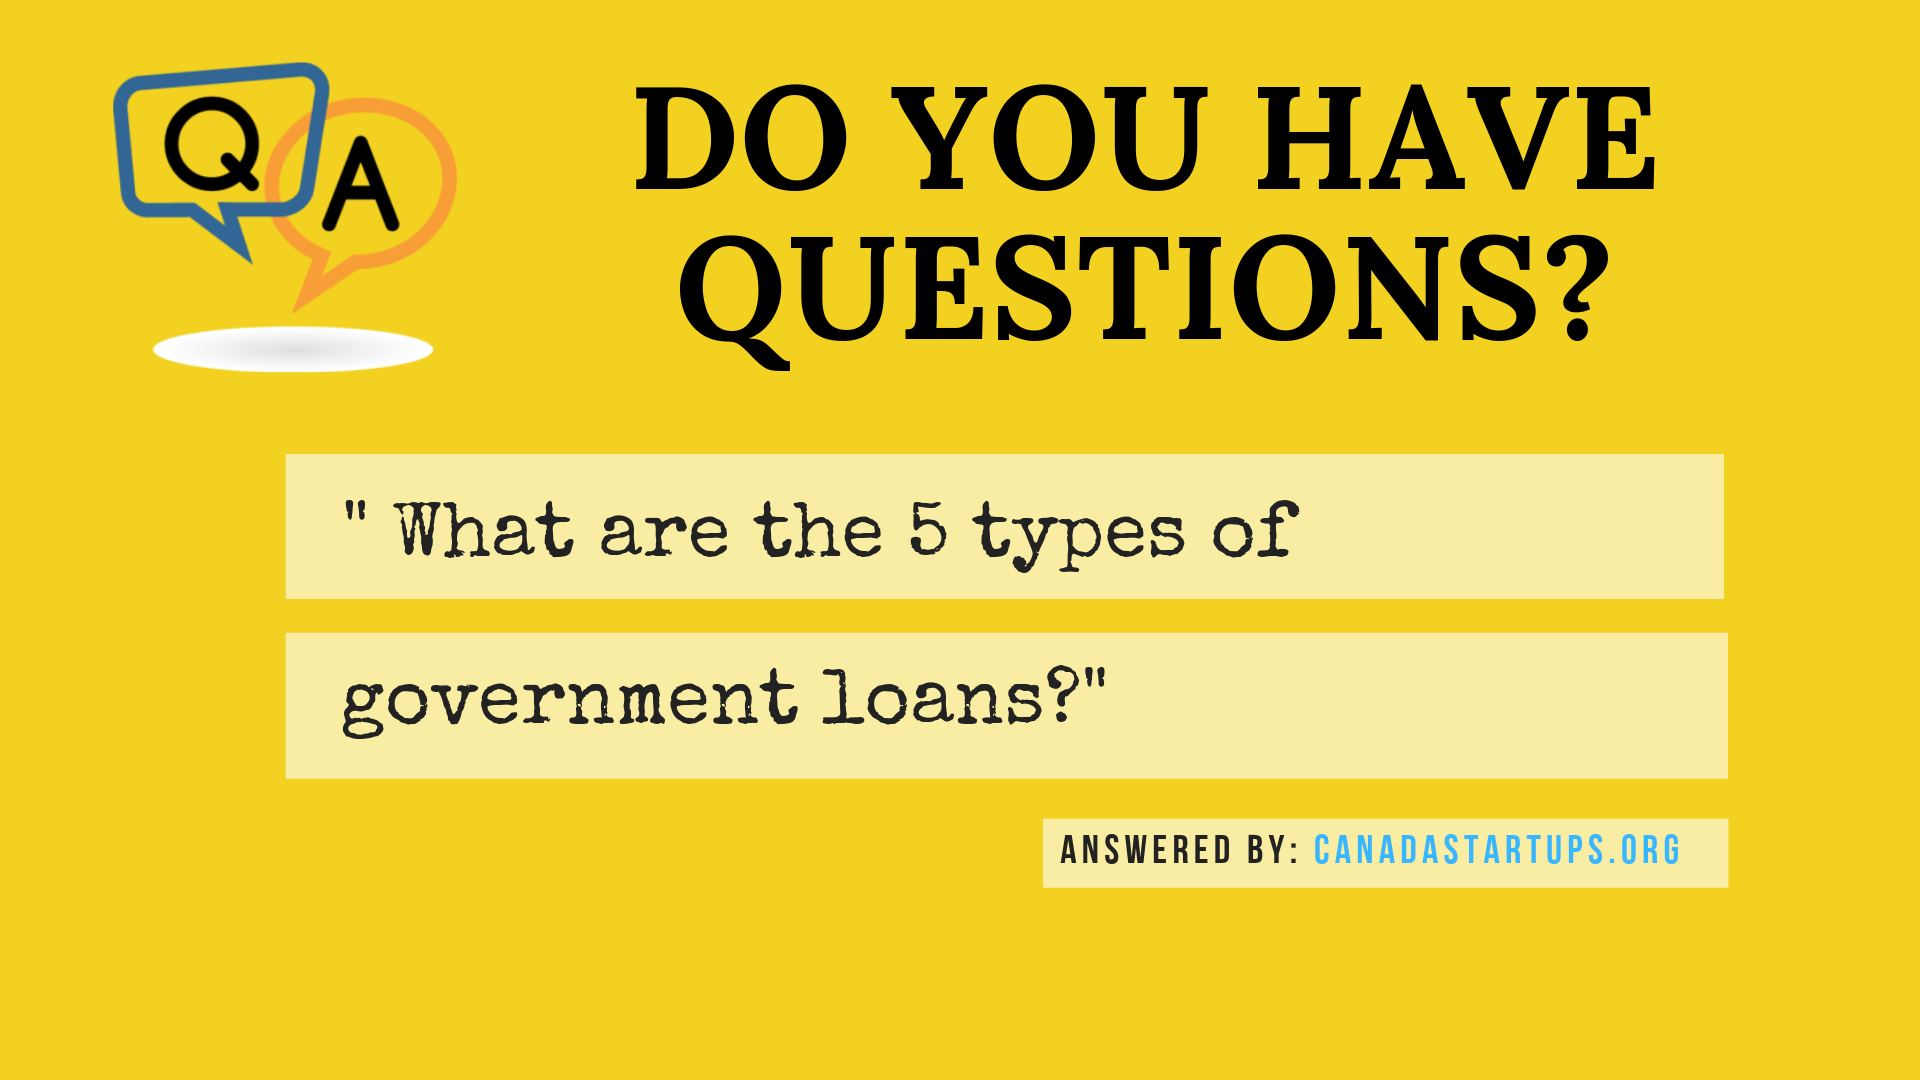 5 types of government loans